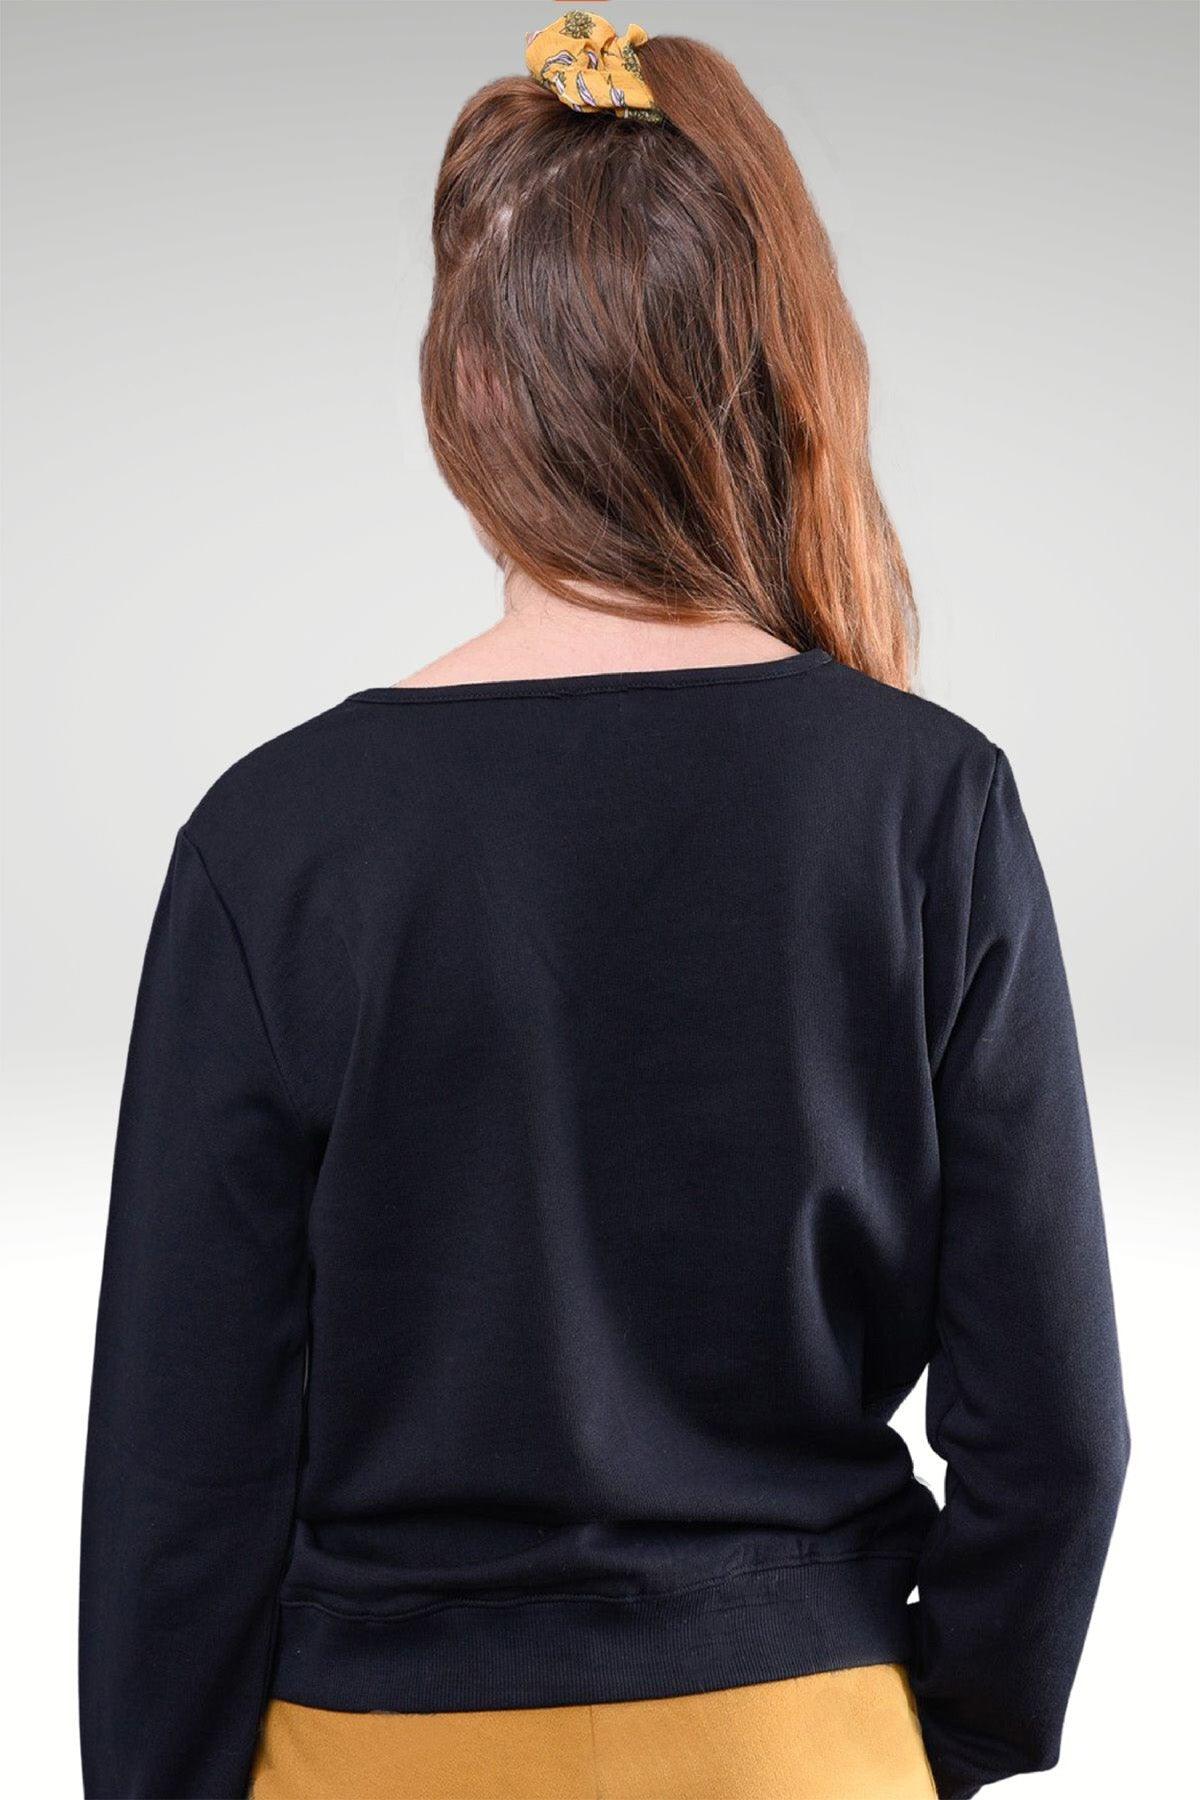 ADAH FLORAL EMBROIDERED KNIT TOP - zohaonline- Back view